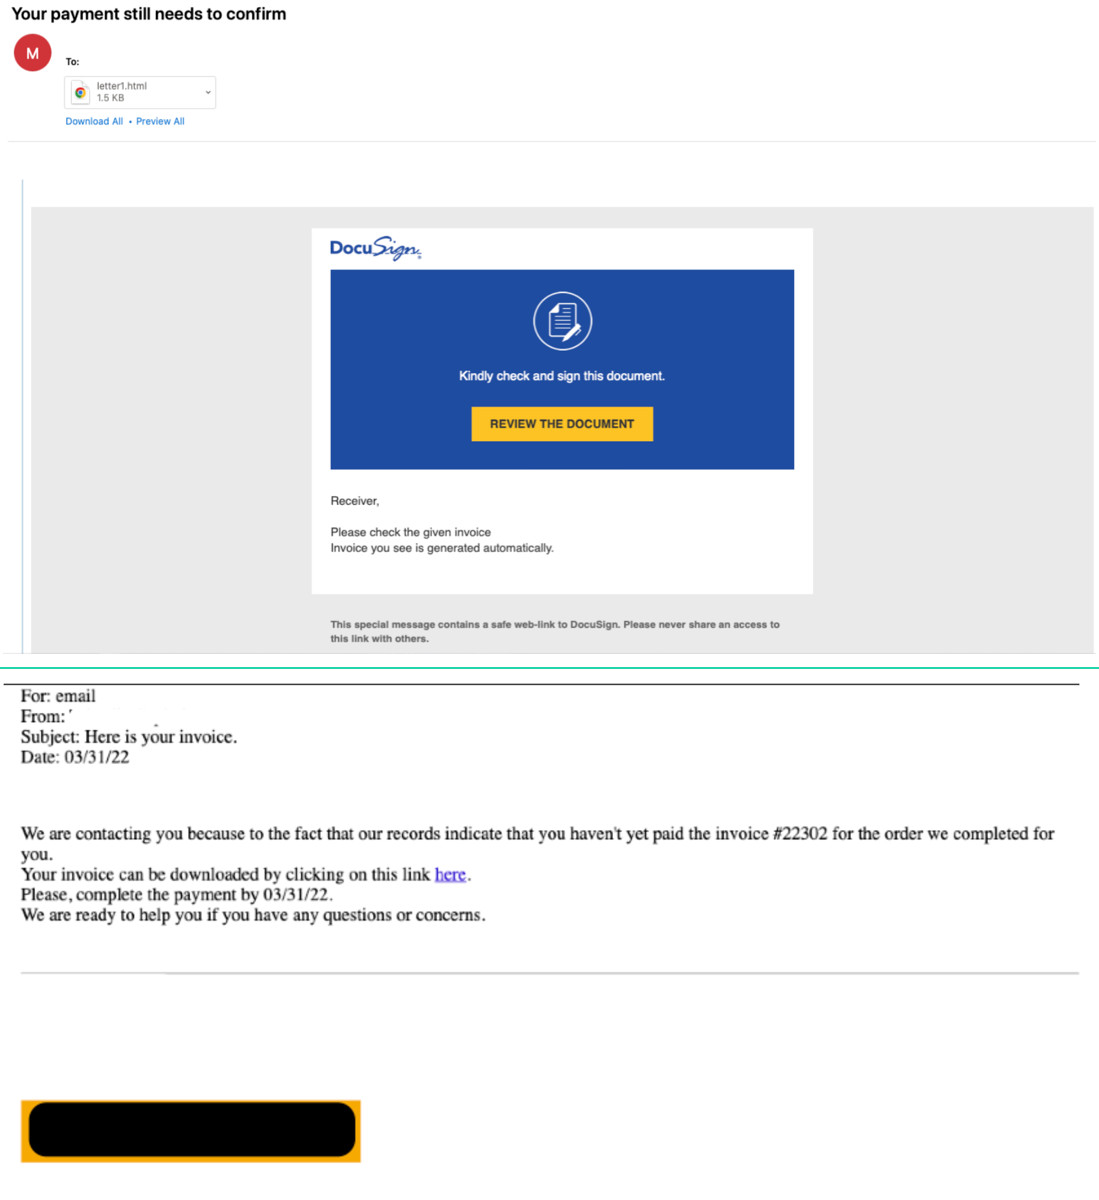 Bumblebee delivery in phishing campaign